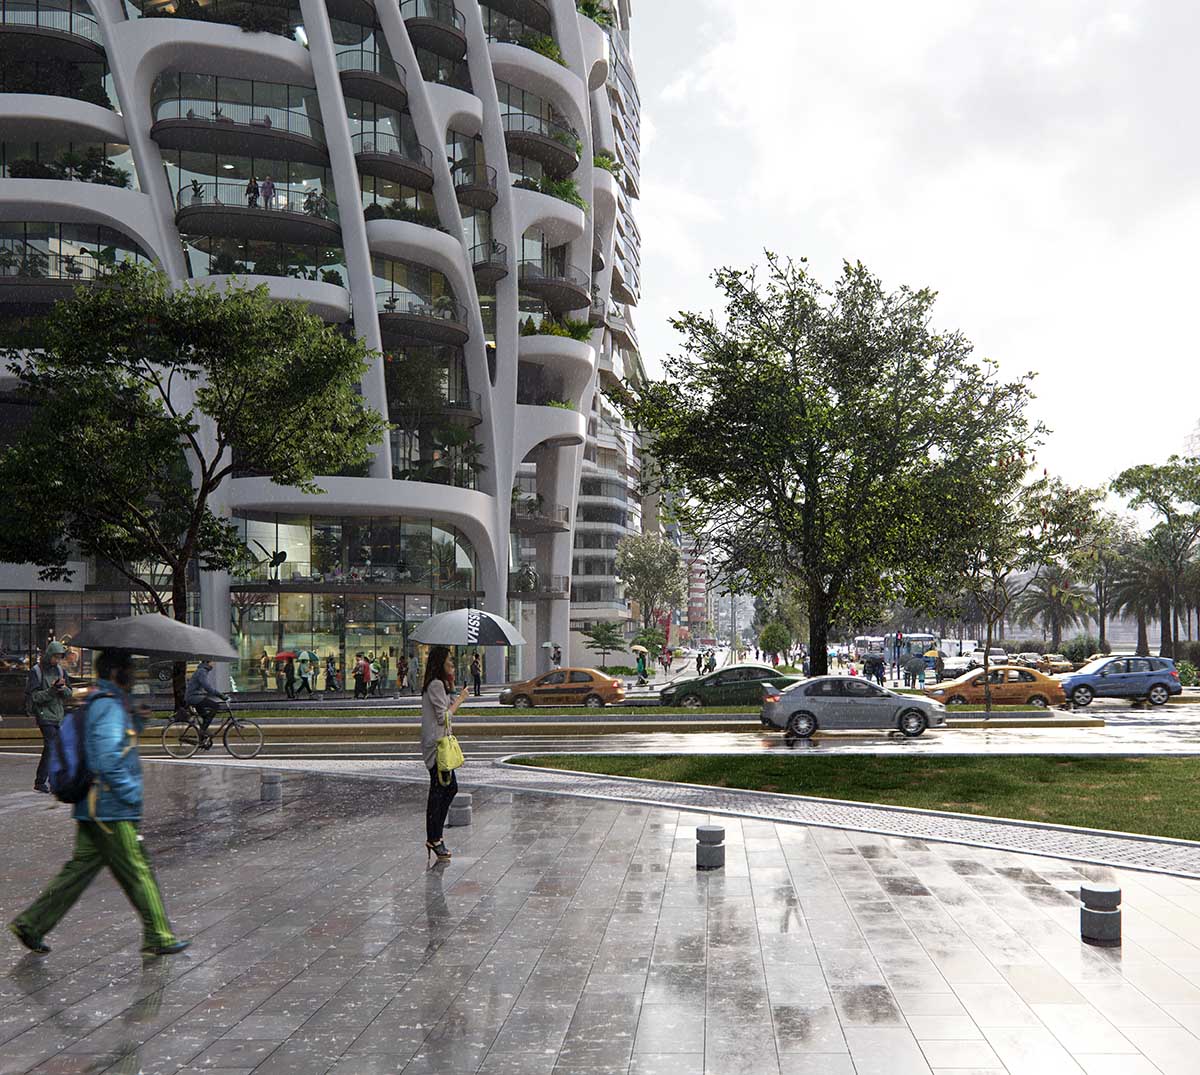 MAD unveils its twisting mixed-use Qondesa tower, set to become Quito’s tallest building